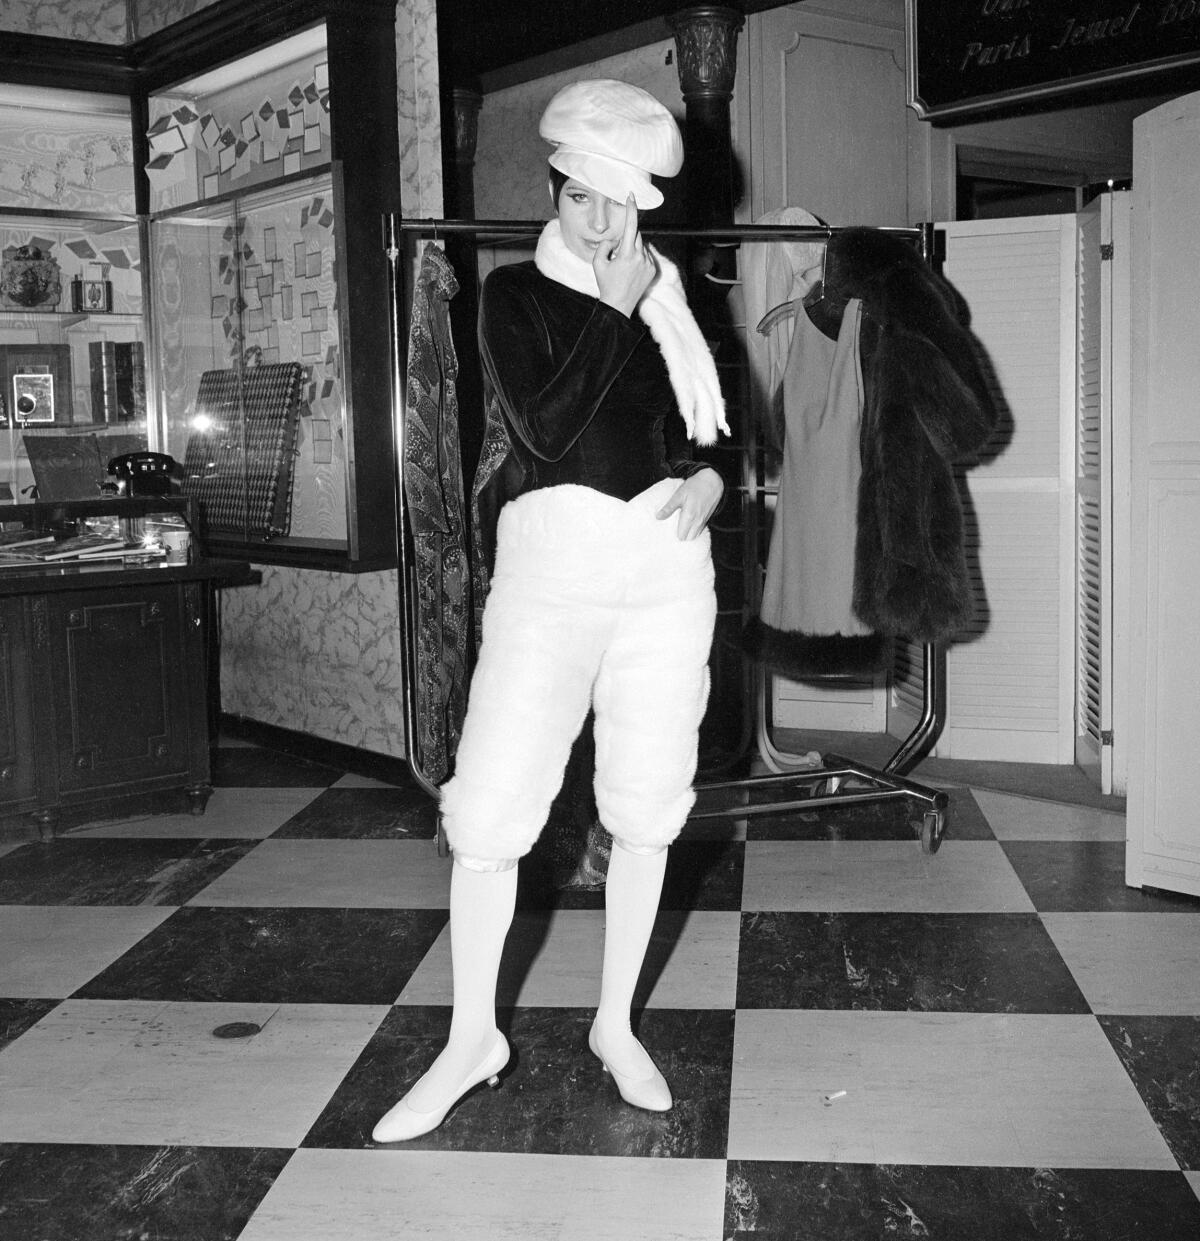 Barbra Streisand stands on a checkerboard floor in an empty department store in 1965.